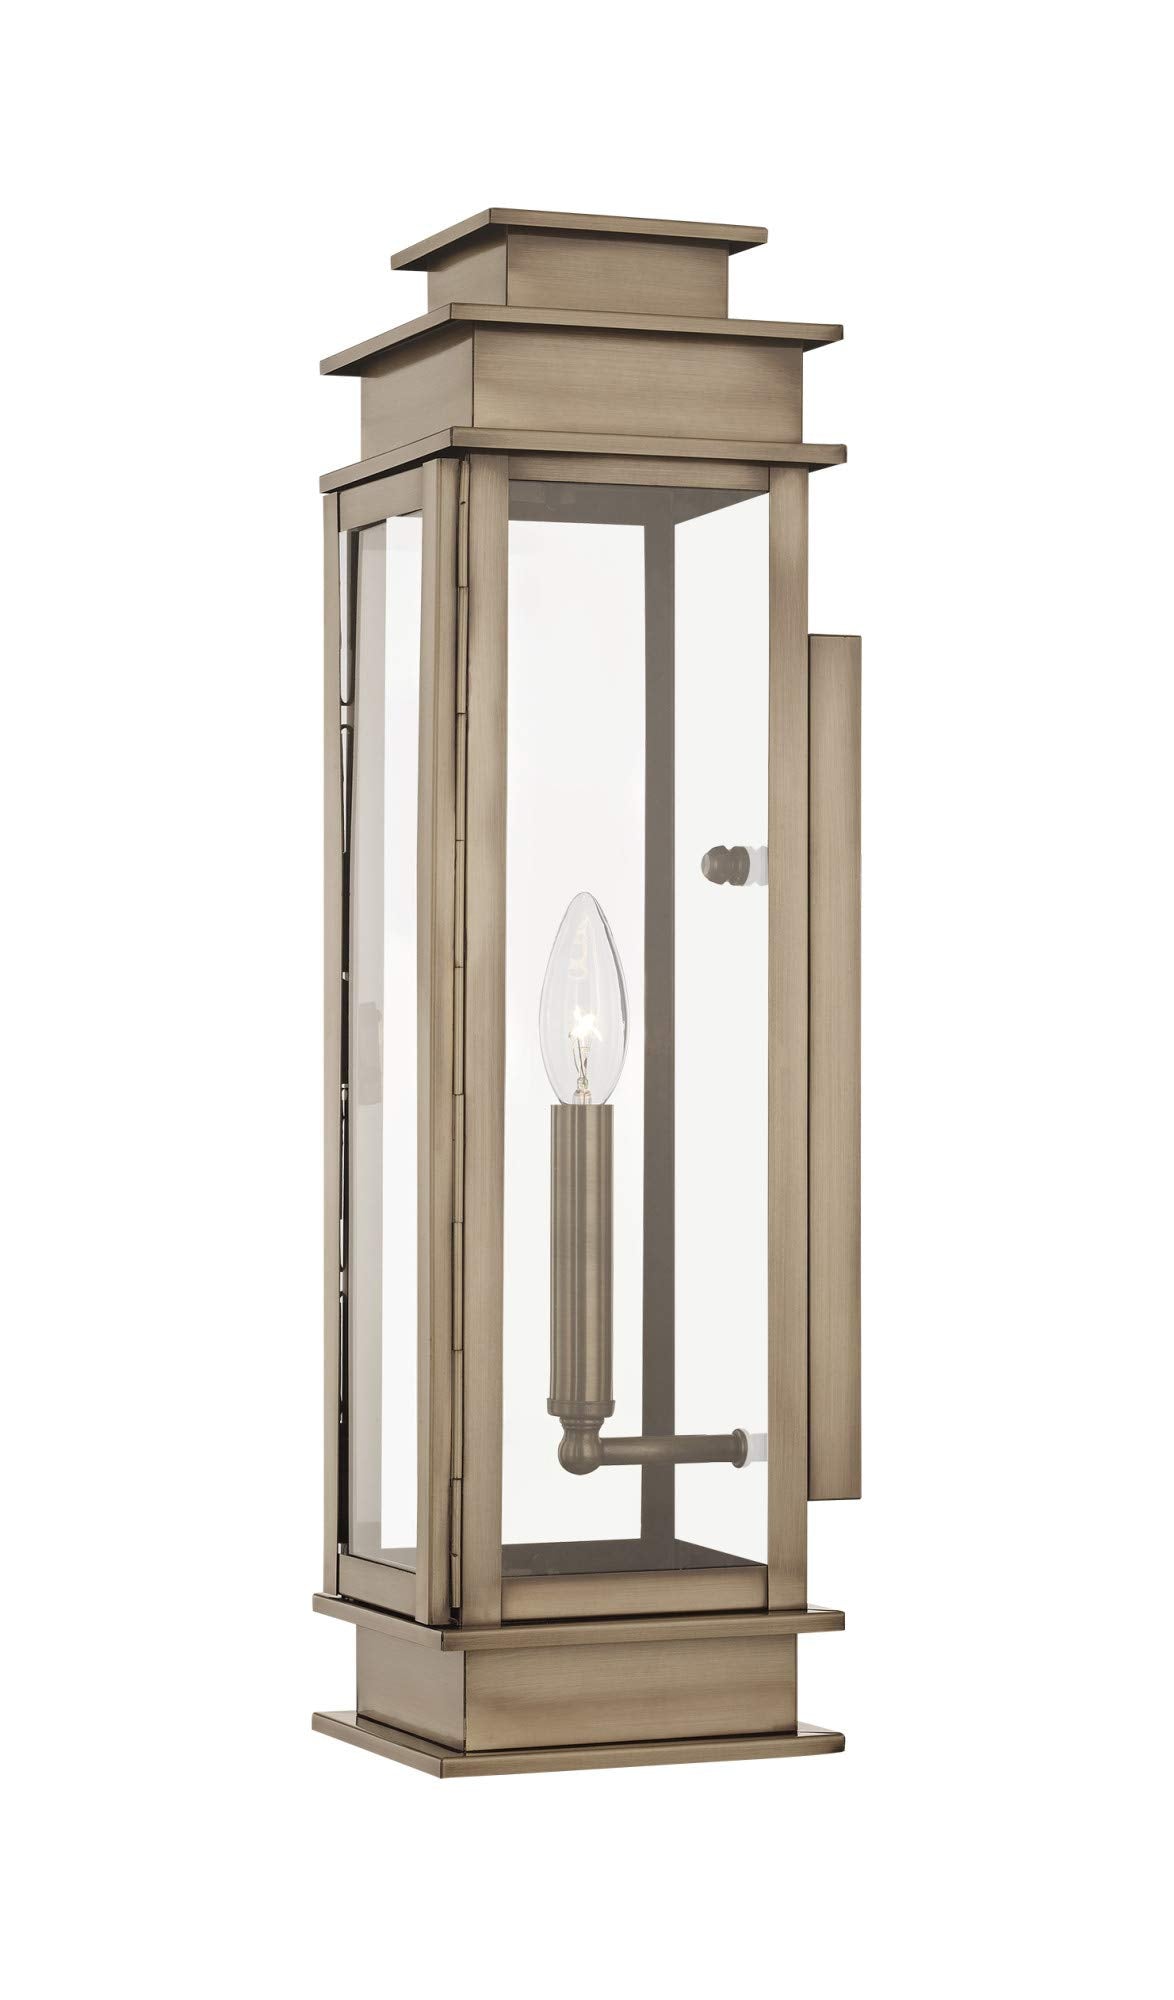 Livex Lighting 20207-04 Transitional One Light Outdoor Wall Lantern from Princeton Collection in Black Finish